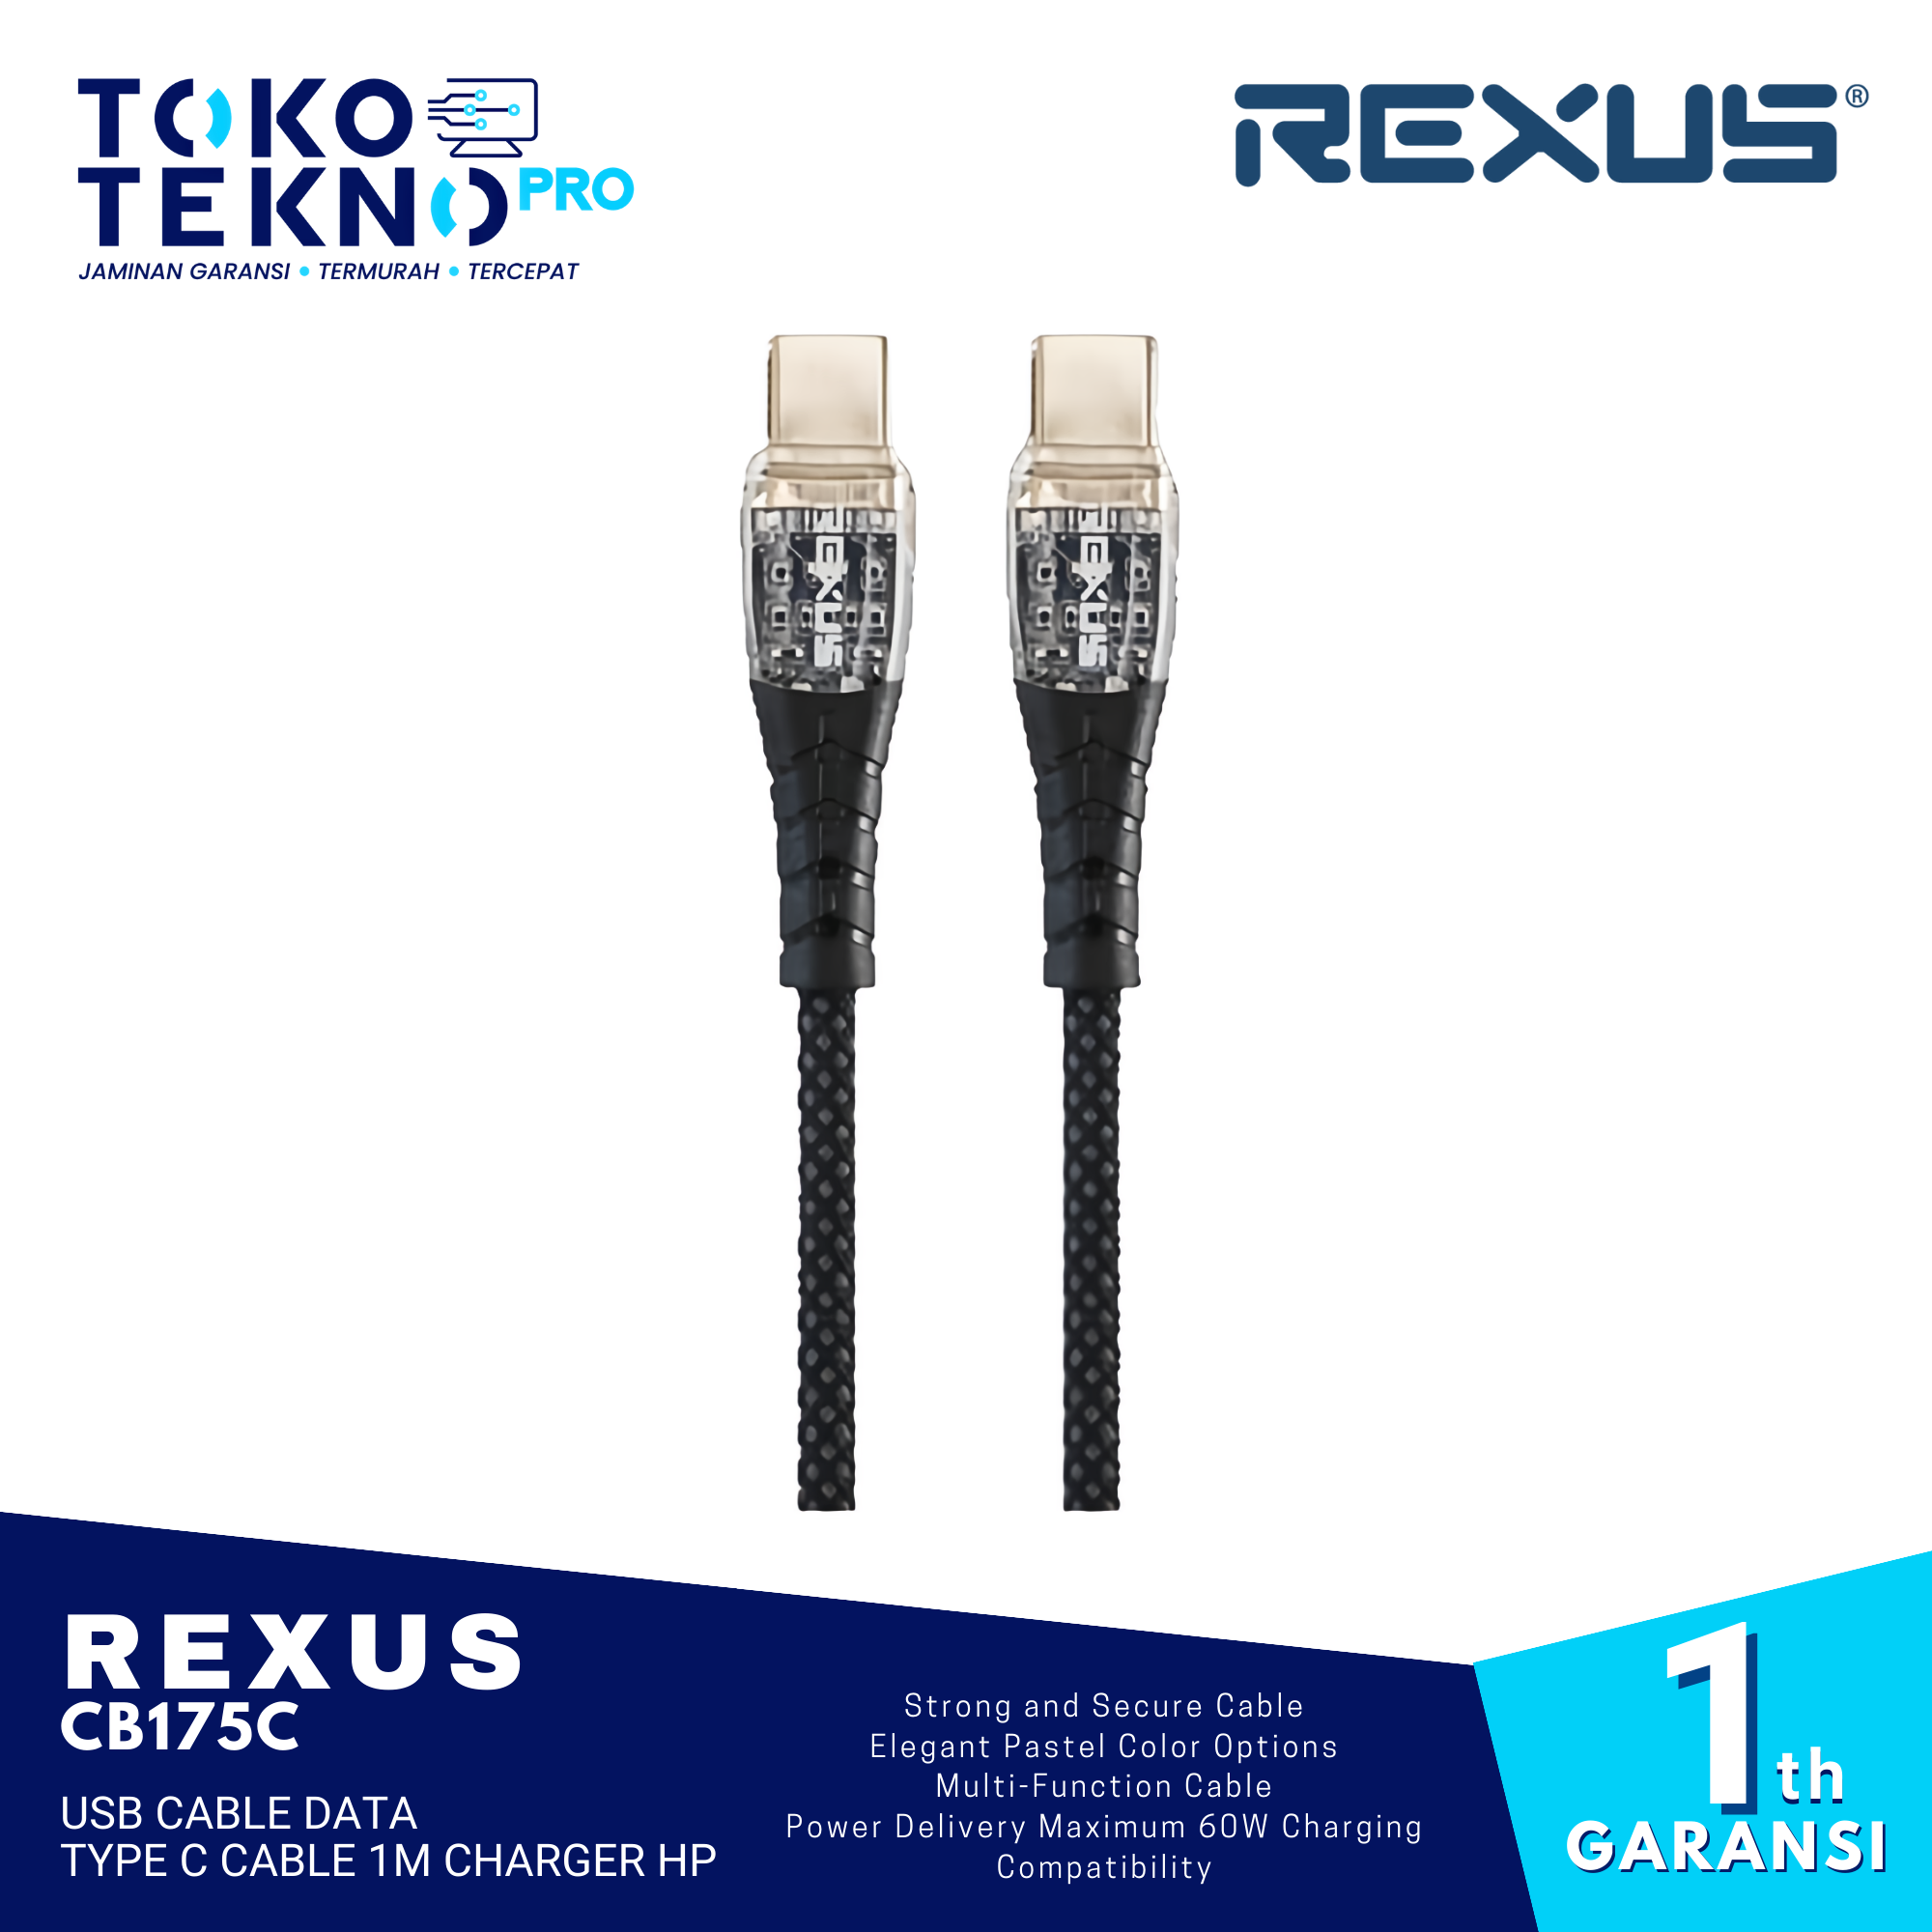 Rexus CB175C / CB175-C USB Cable Data Type C Cable 1m Charger HP